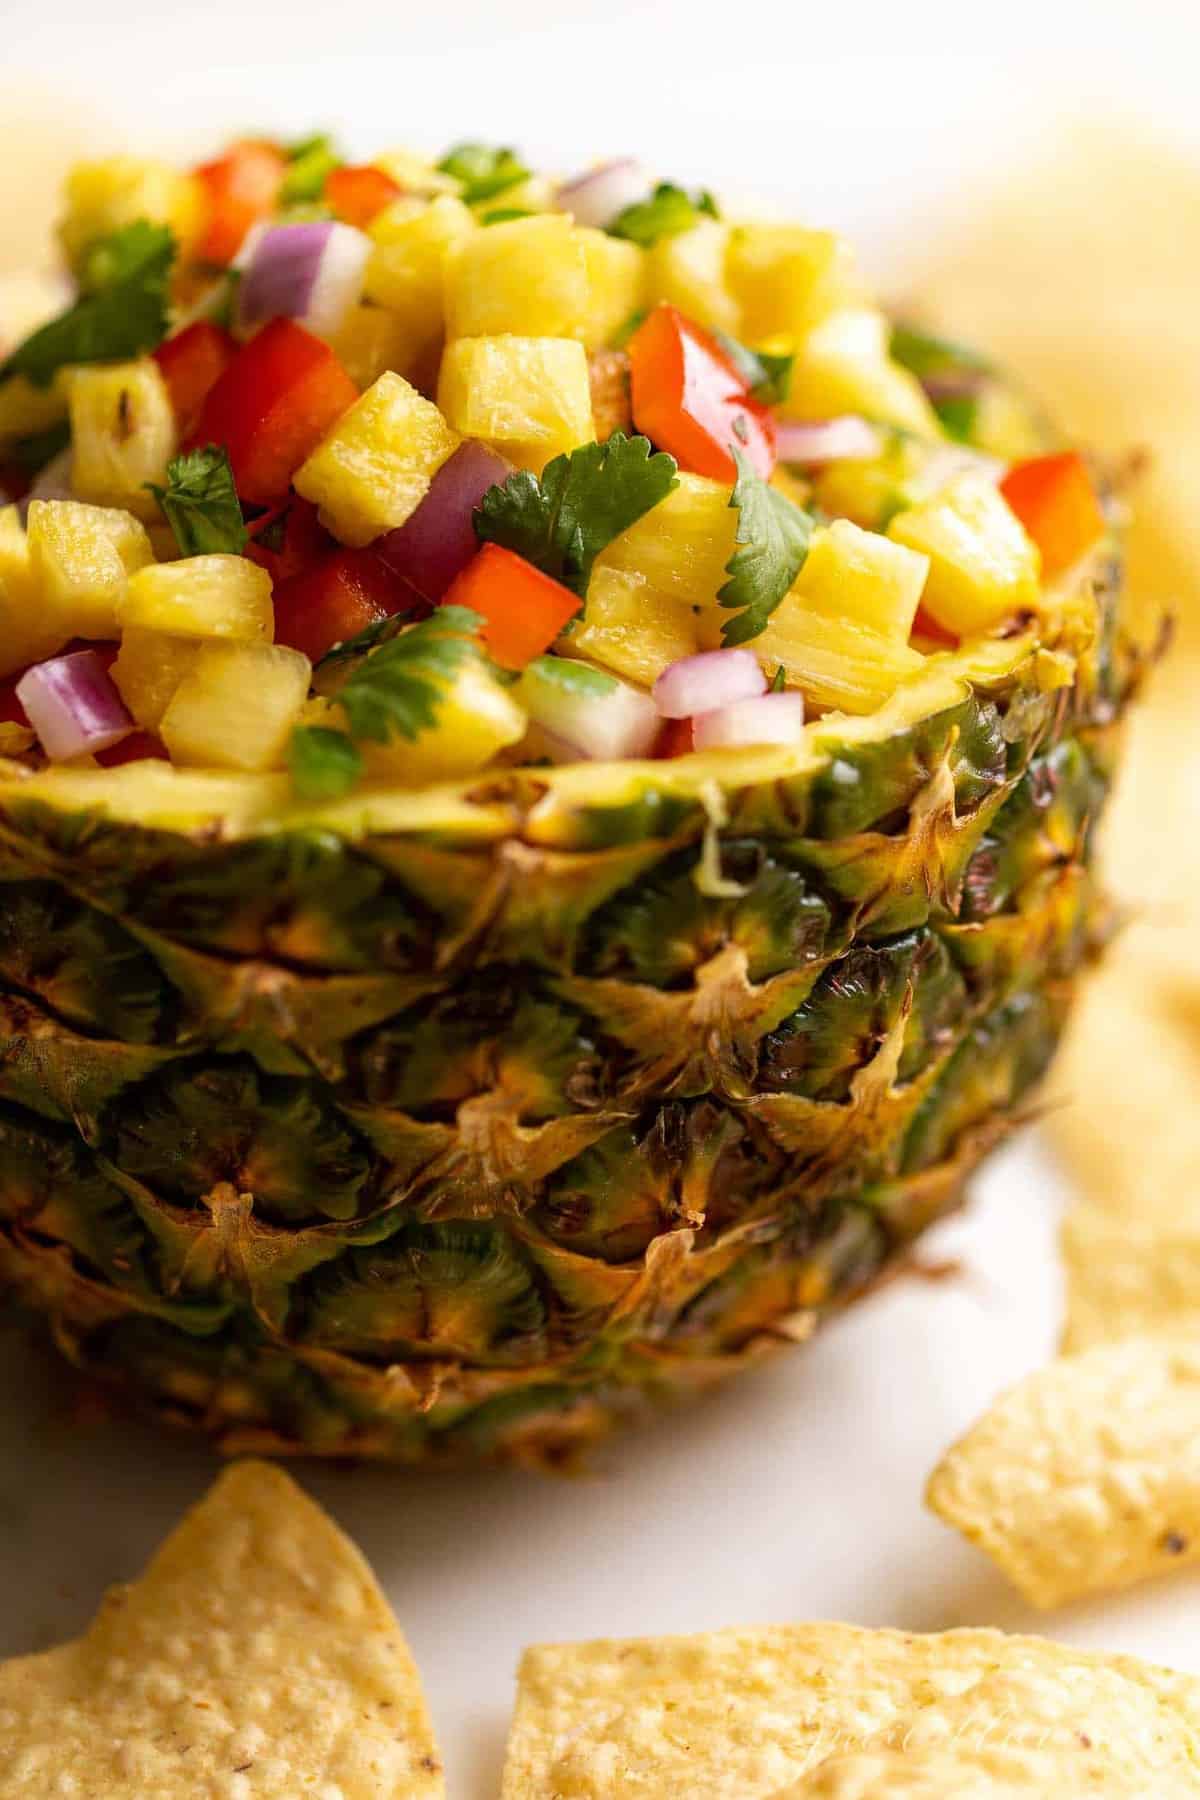 A fresh bowl made from a cut pineapple, filled with pineapple salsa.